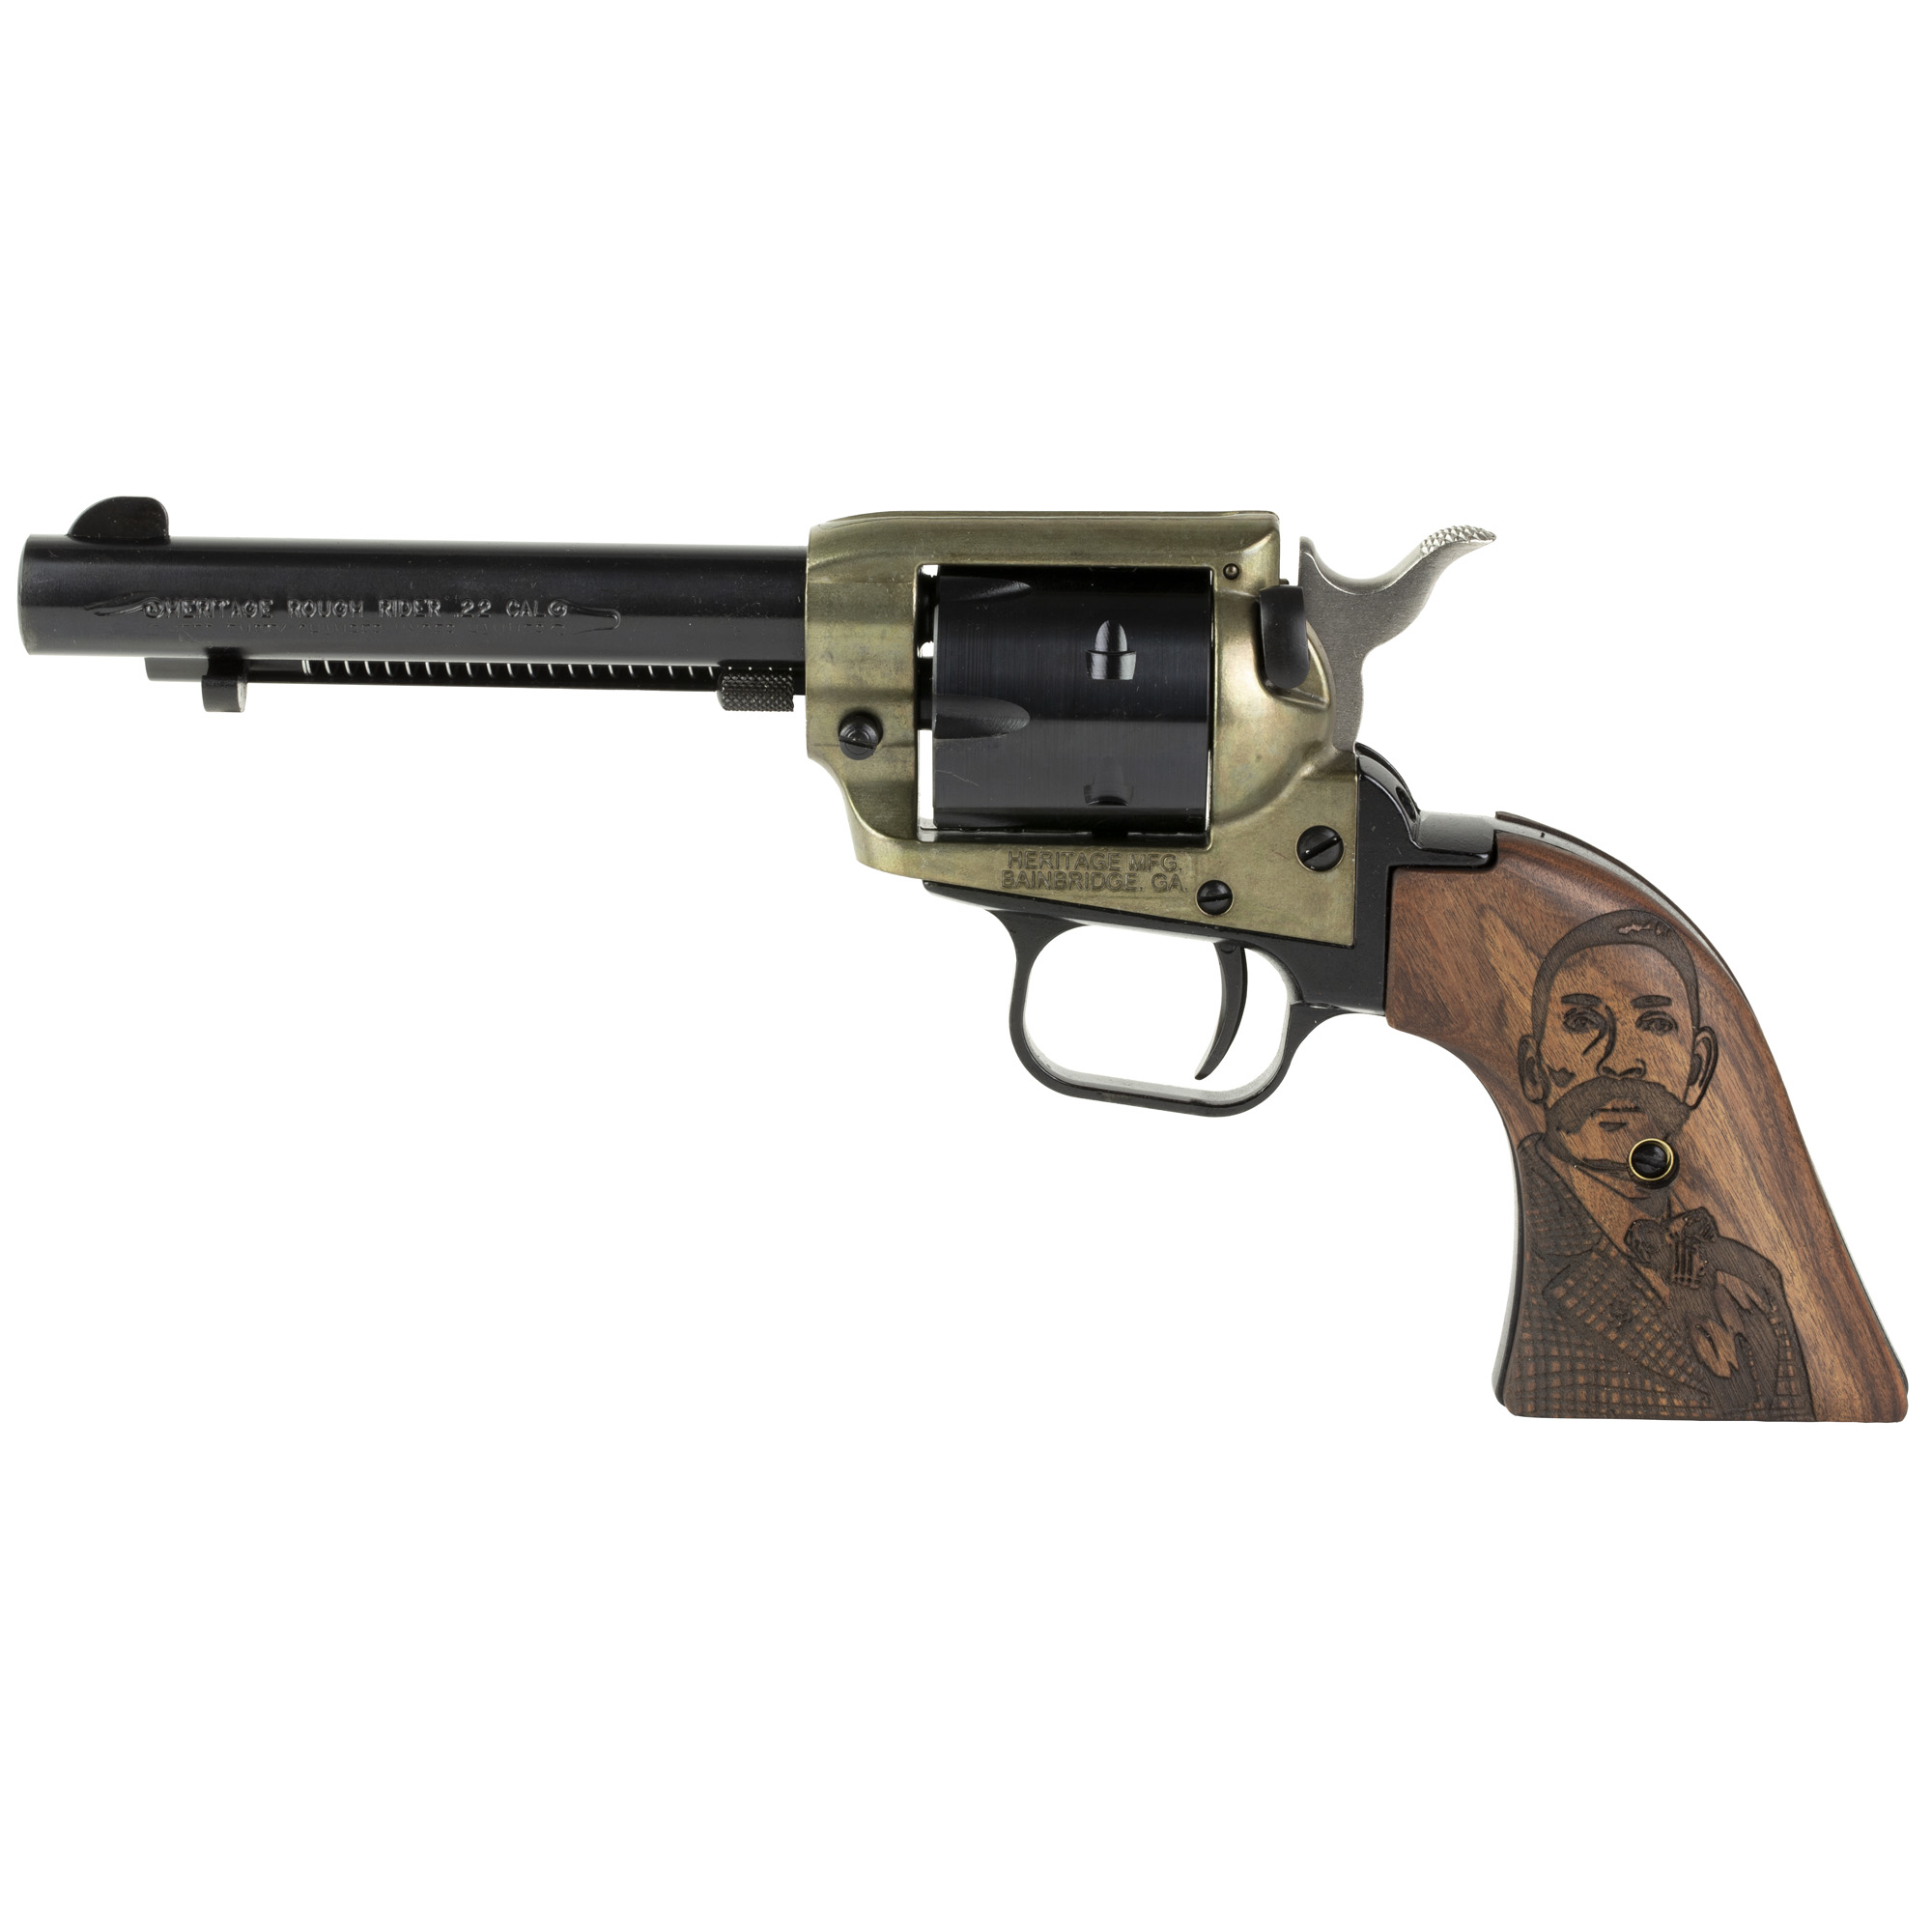 HERITAGE 22LR 4.75 6RD BASS REEVES